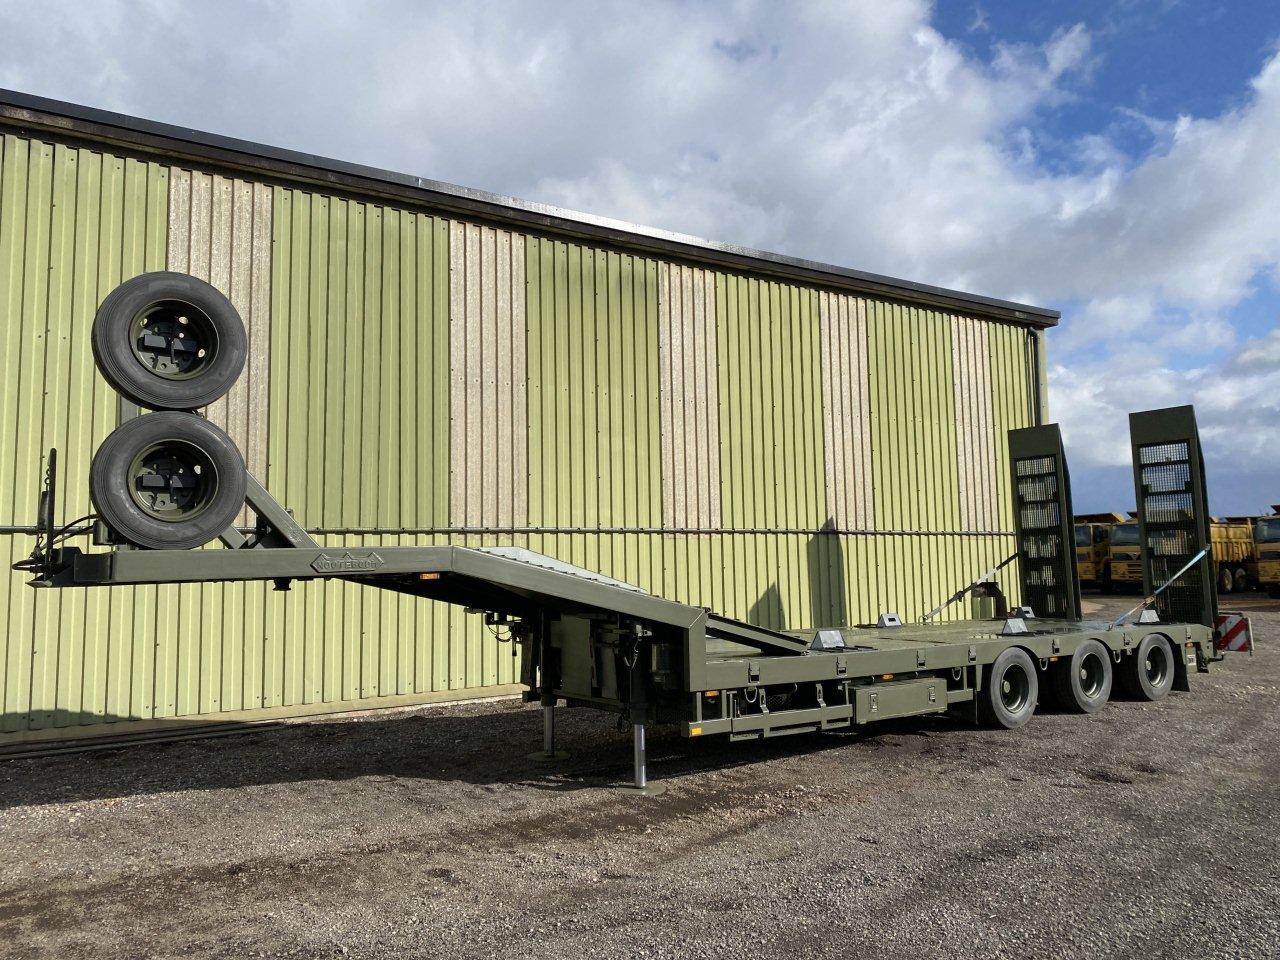 Nooteboom Semi Low Loader Trailer - ex military vehicles for sale, mod surplus